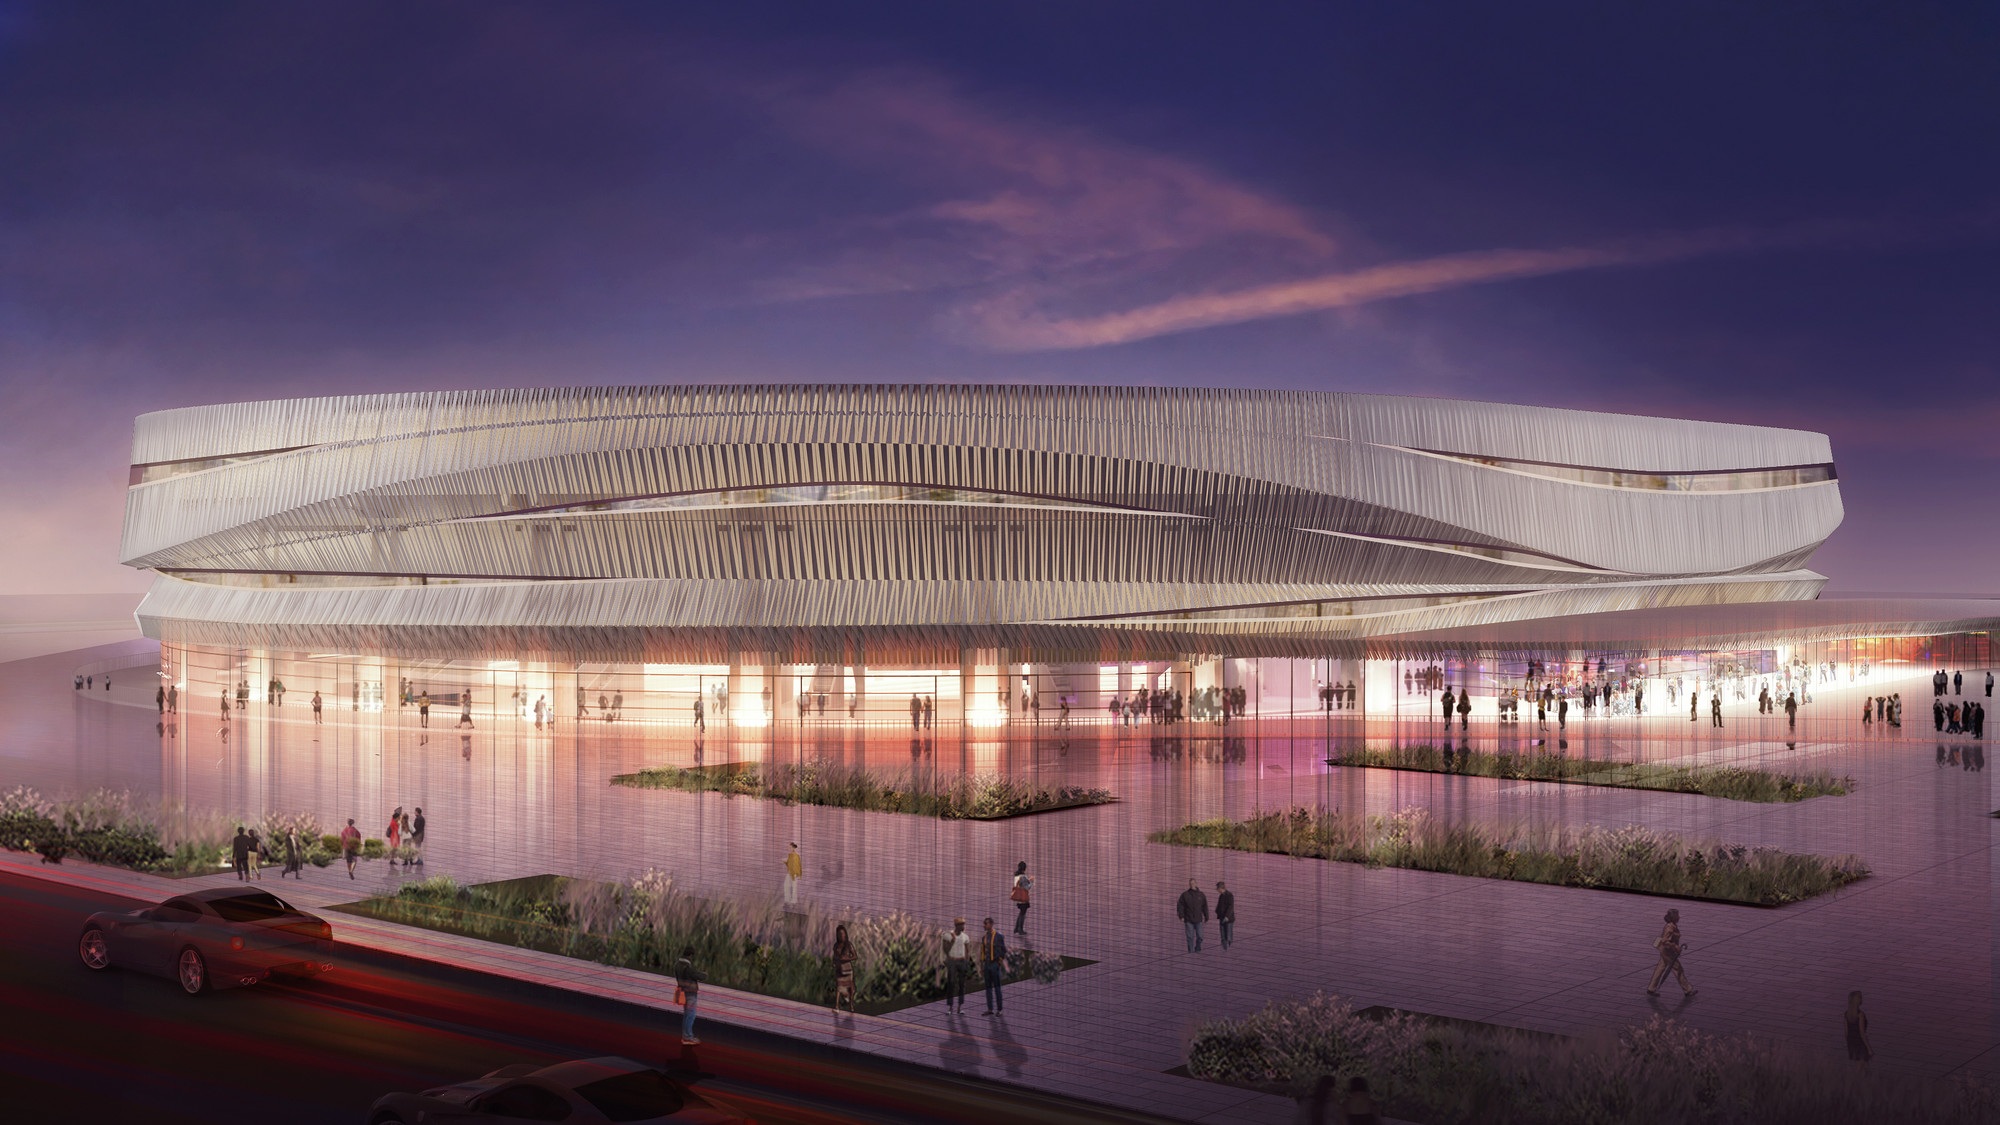 Bruce Ratner's proposal for a new Nassau Coliseum has been accepted by Nassau County.